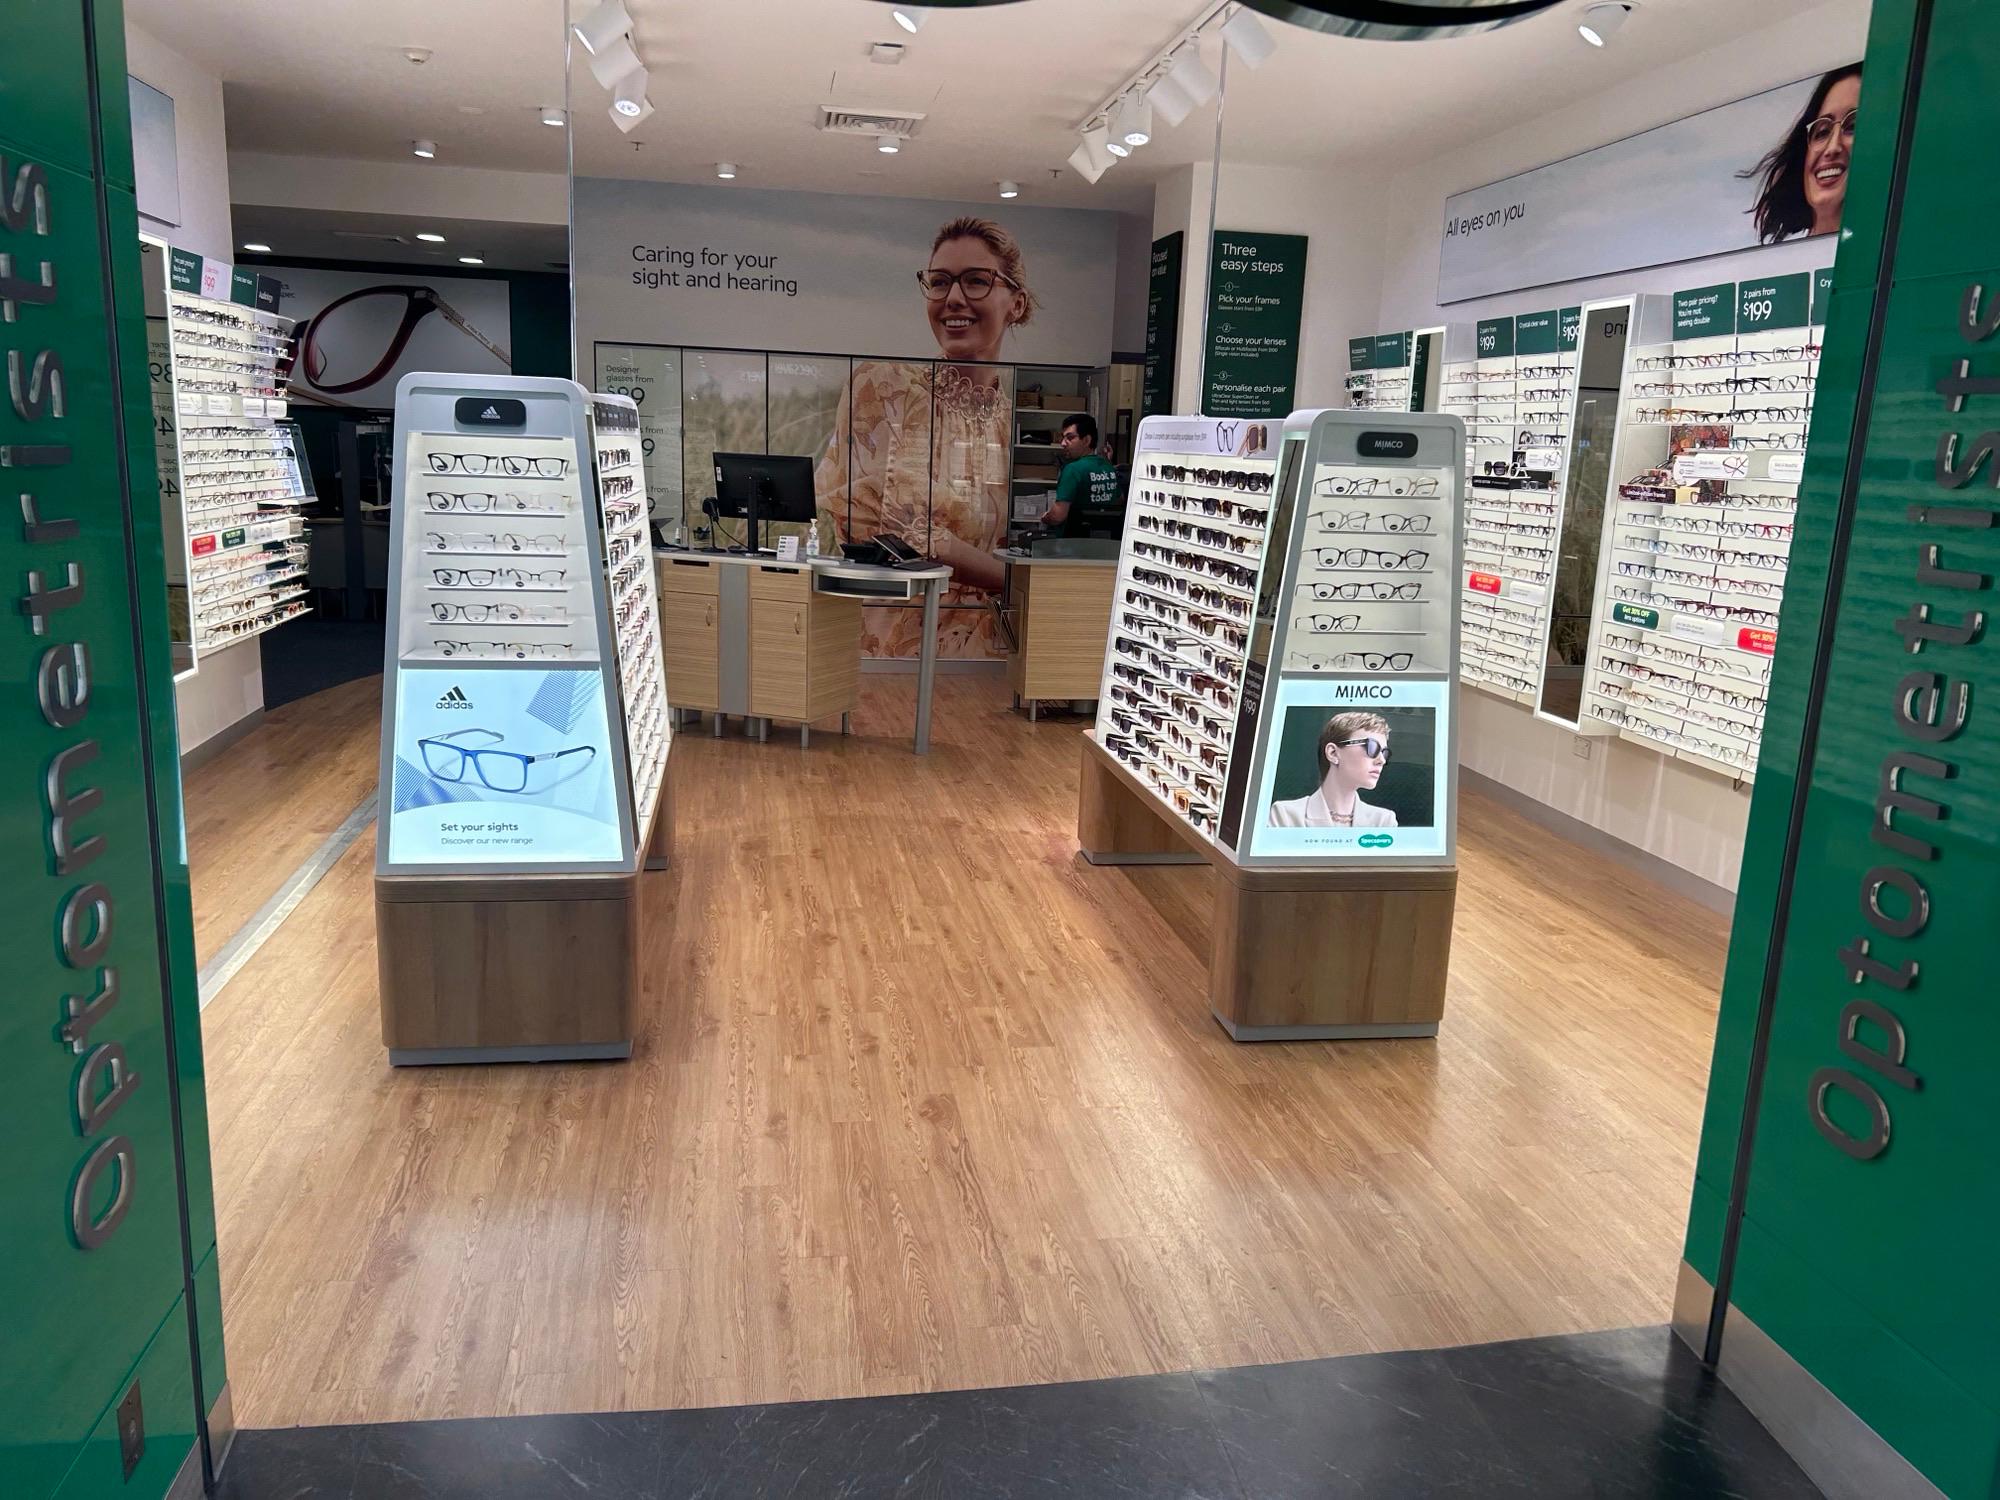 Images Specsavers Optometrists & Audiology - Leichhardt Marketplace